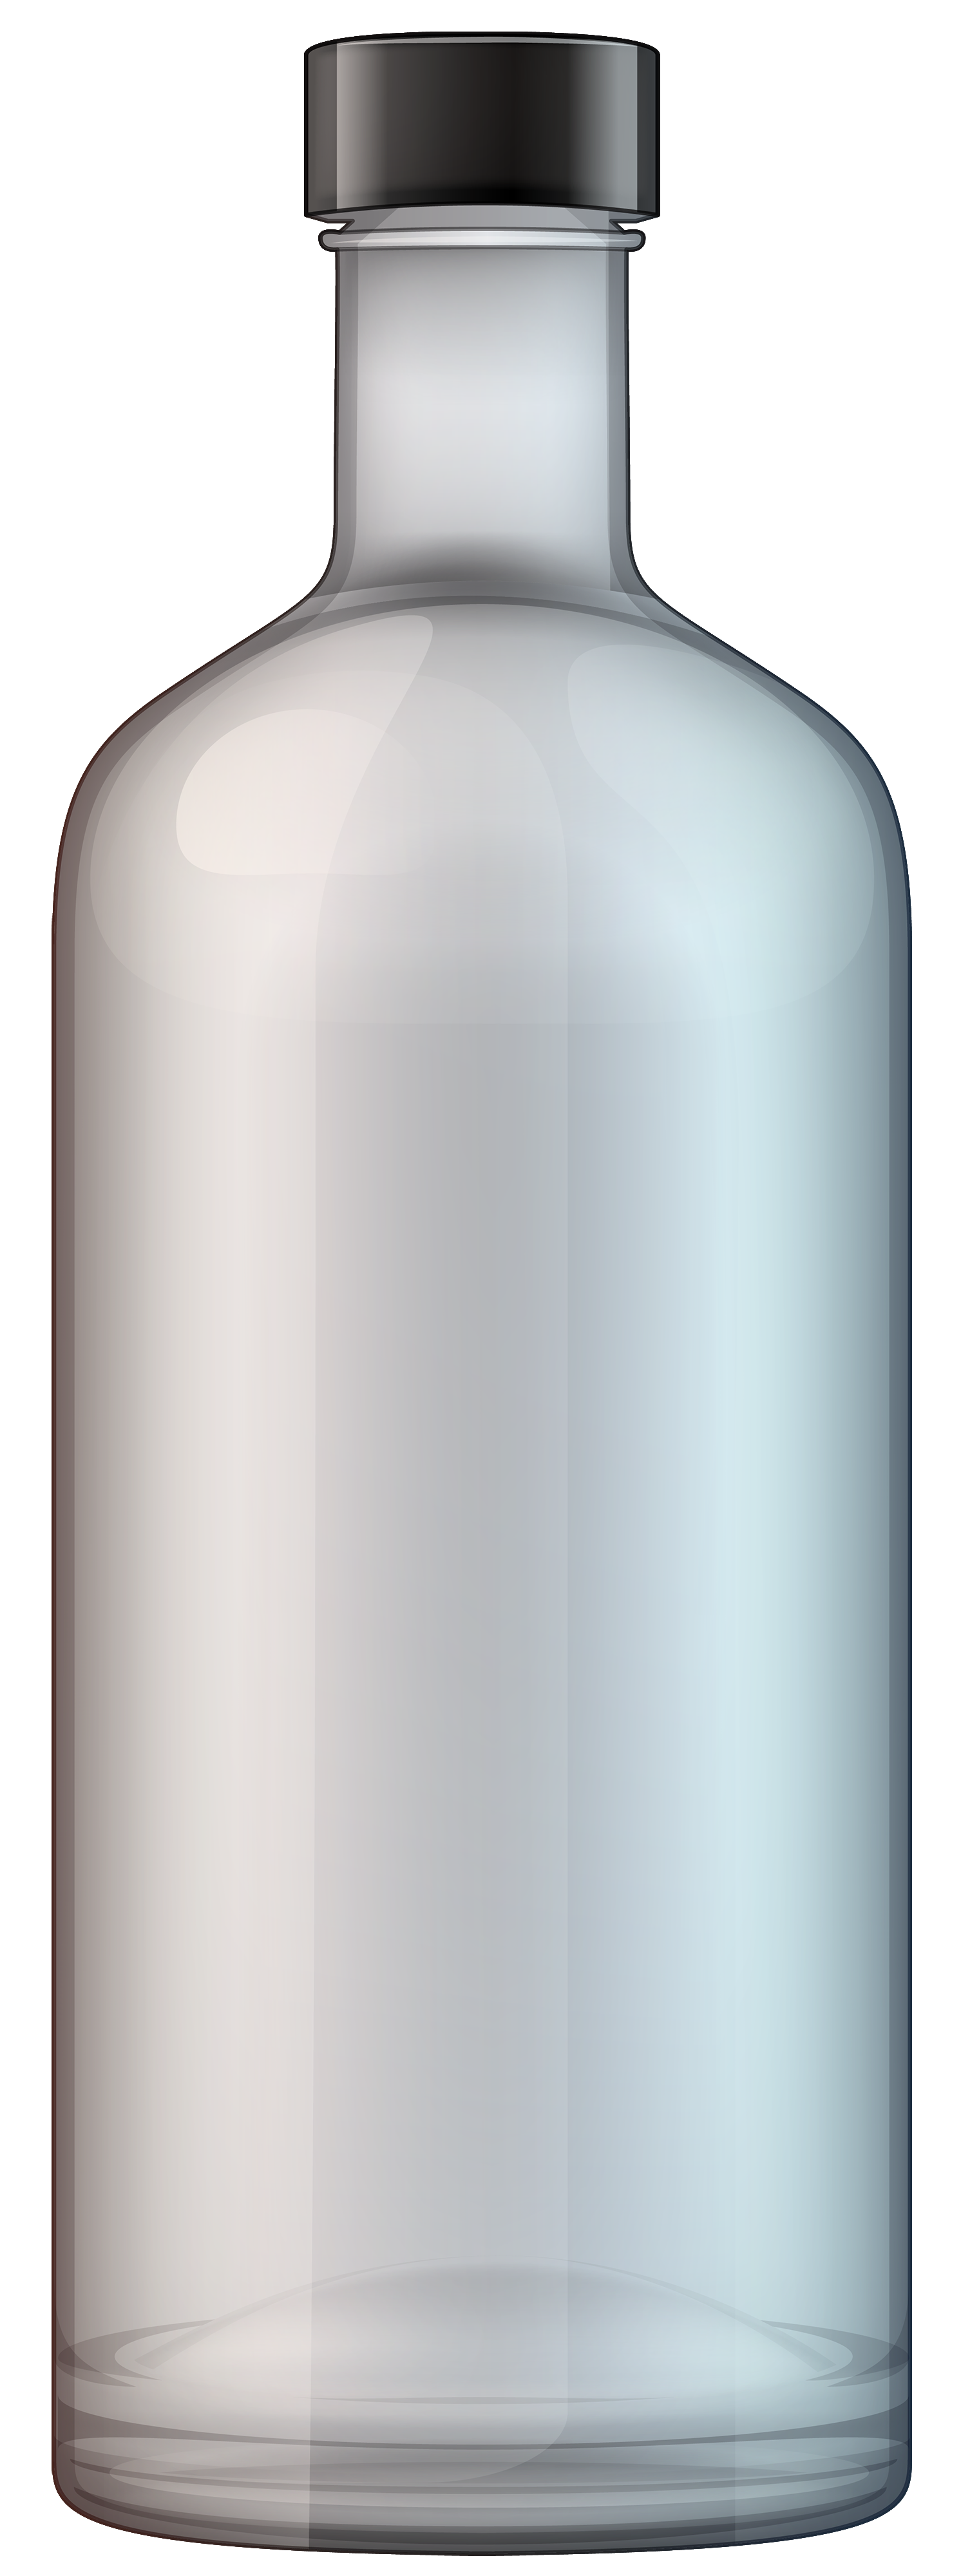 A bottle of vodka clipart - Clipground